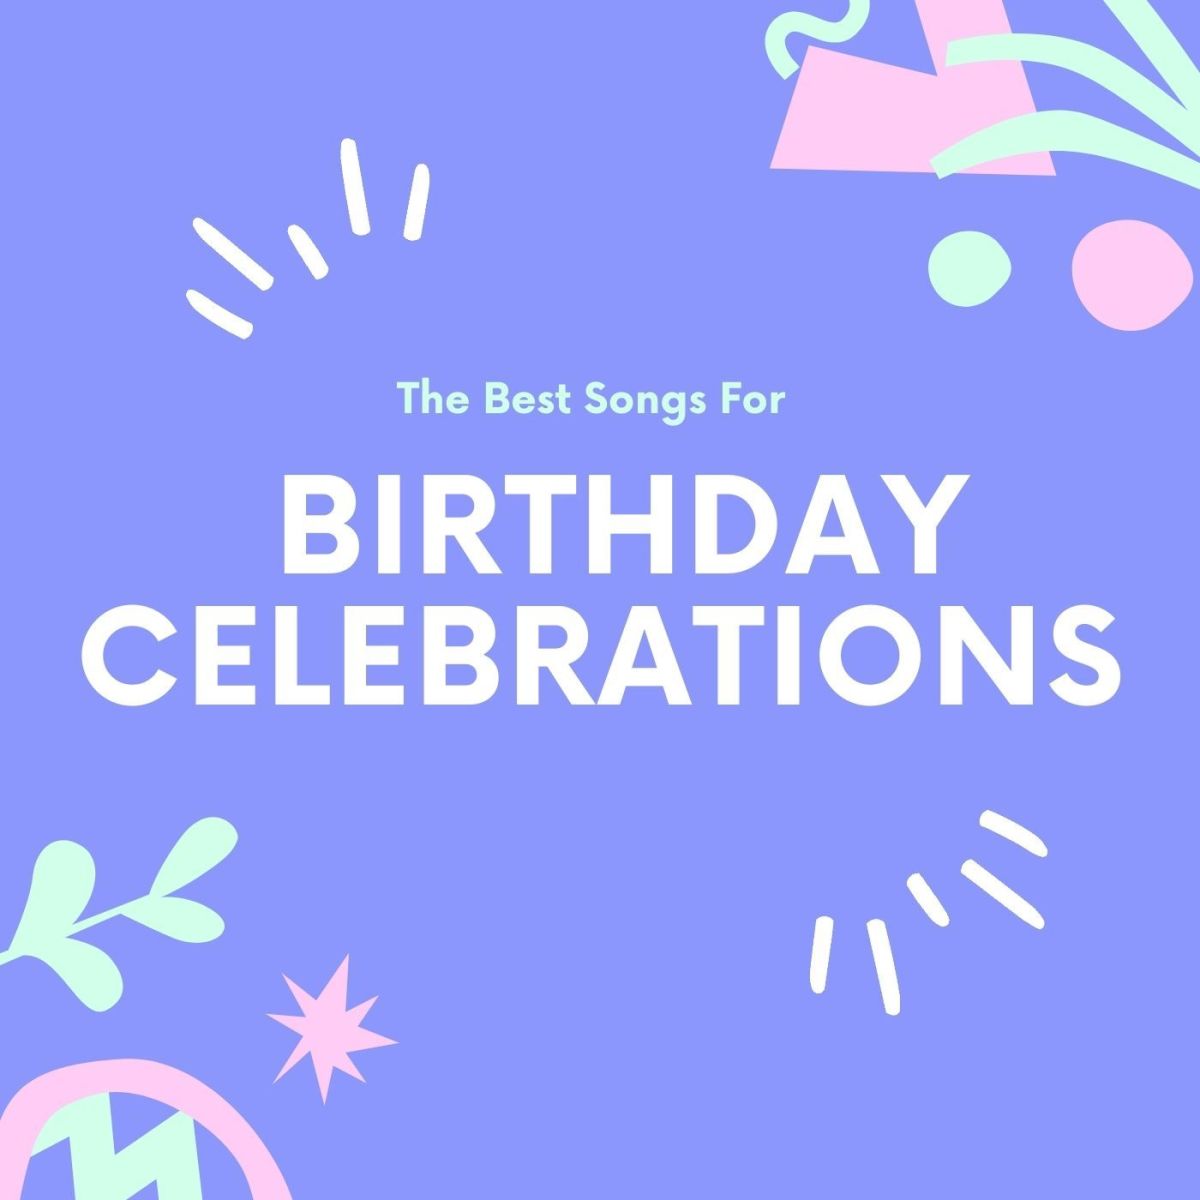 10 of the Best Songs for Birthday Celebrations